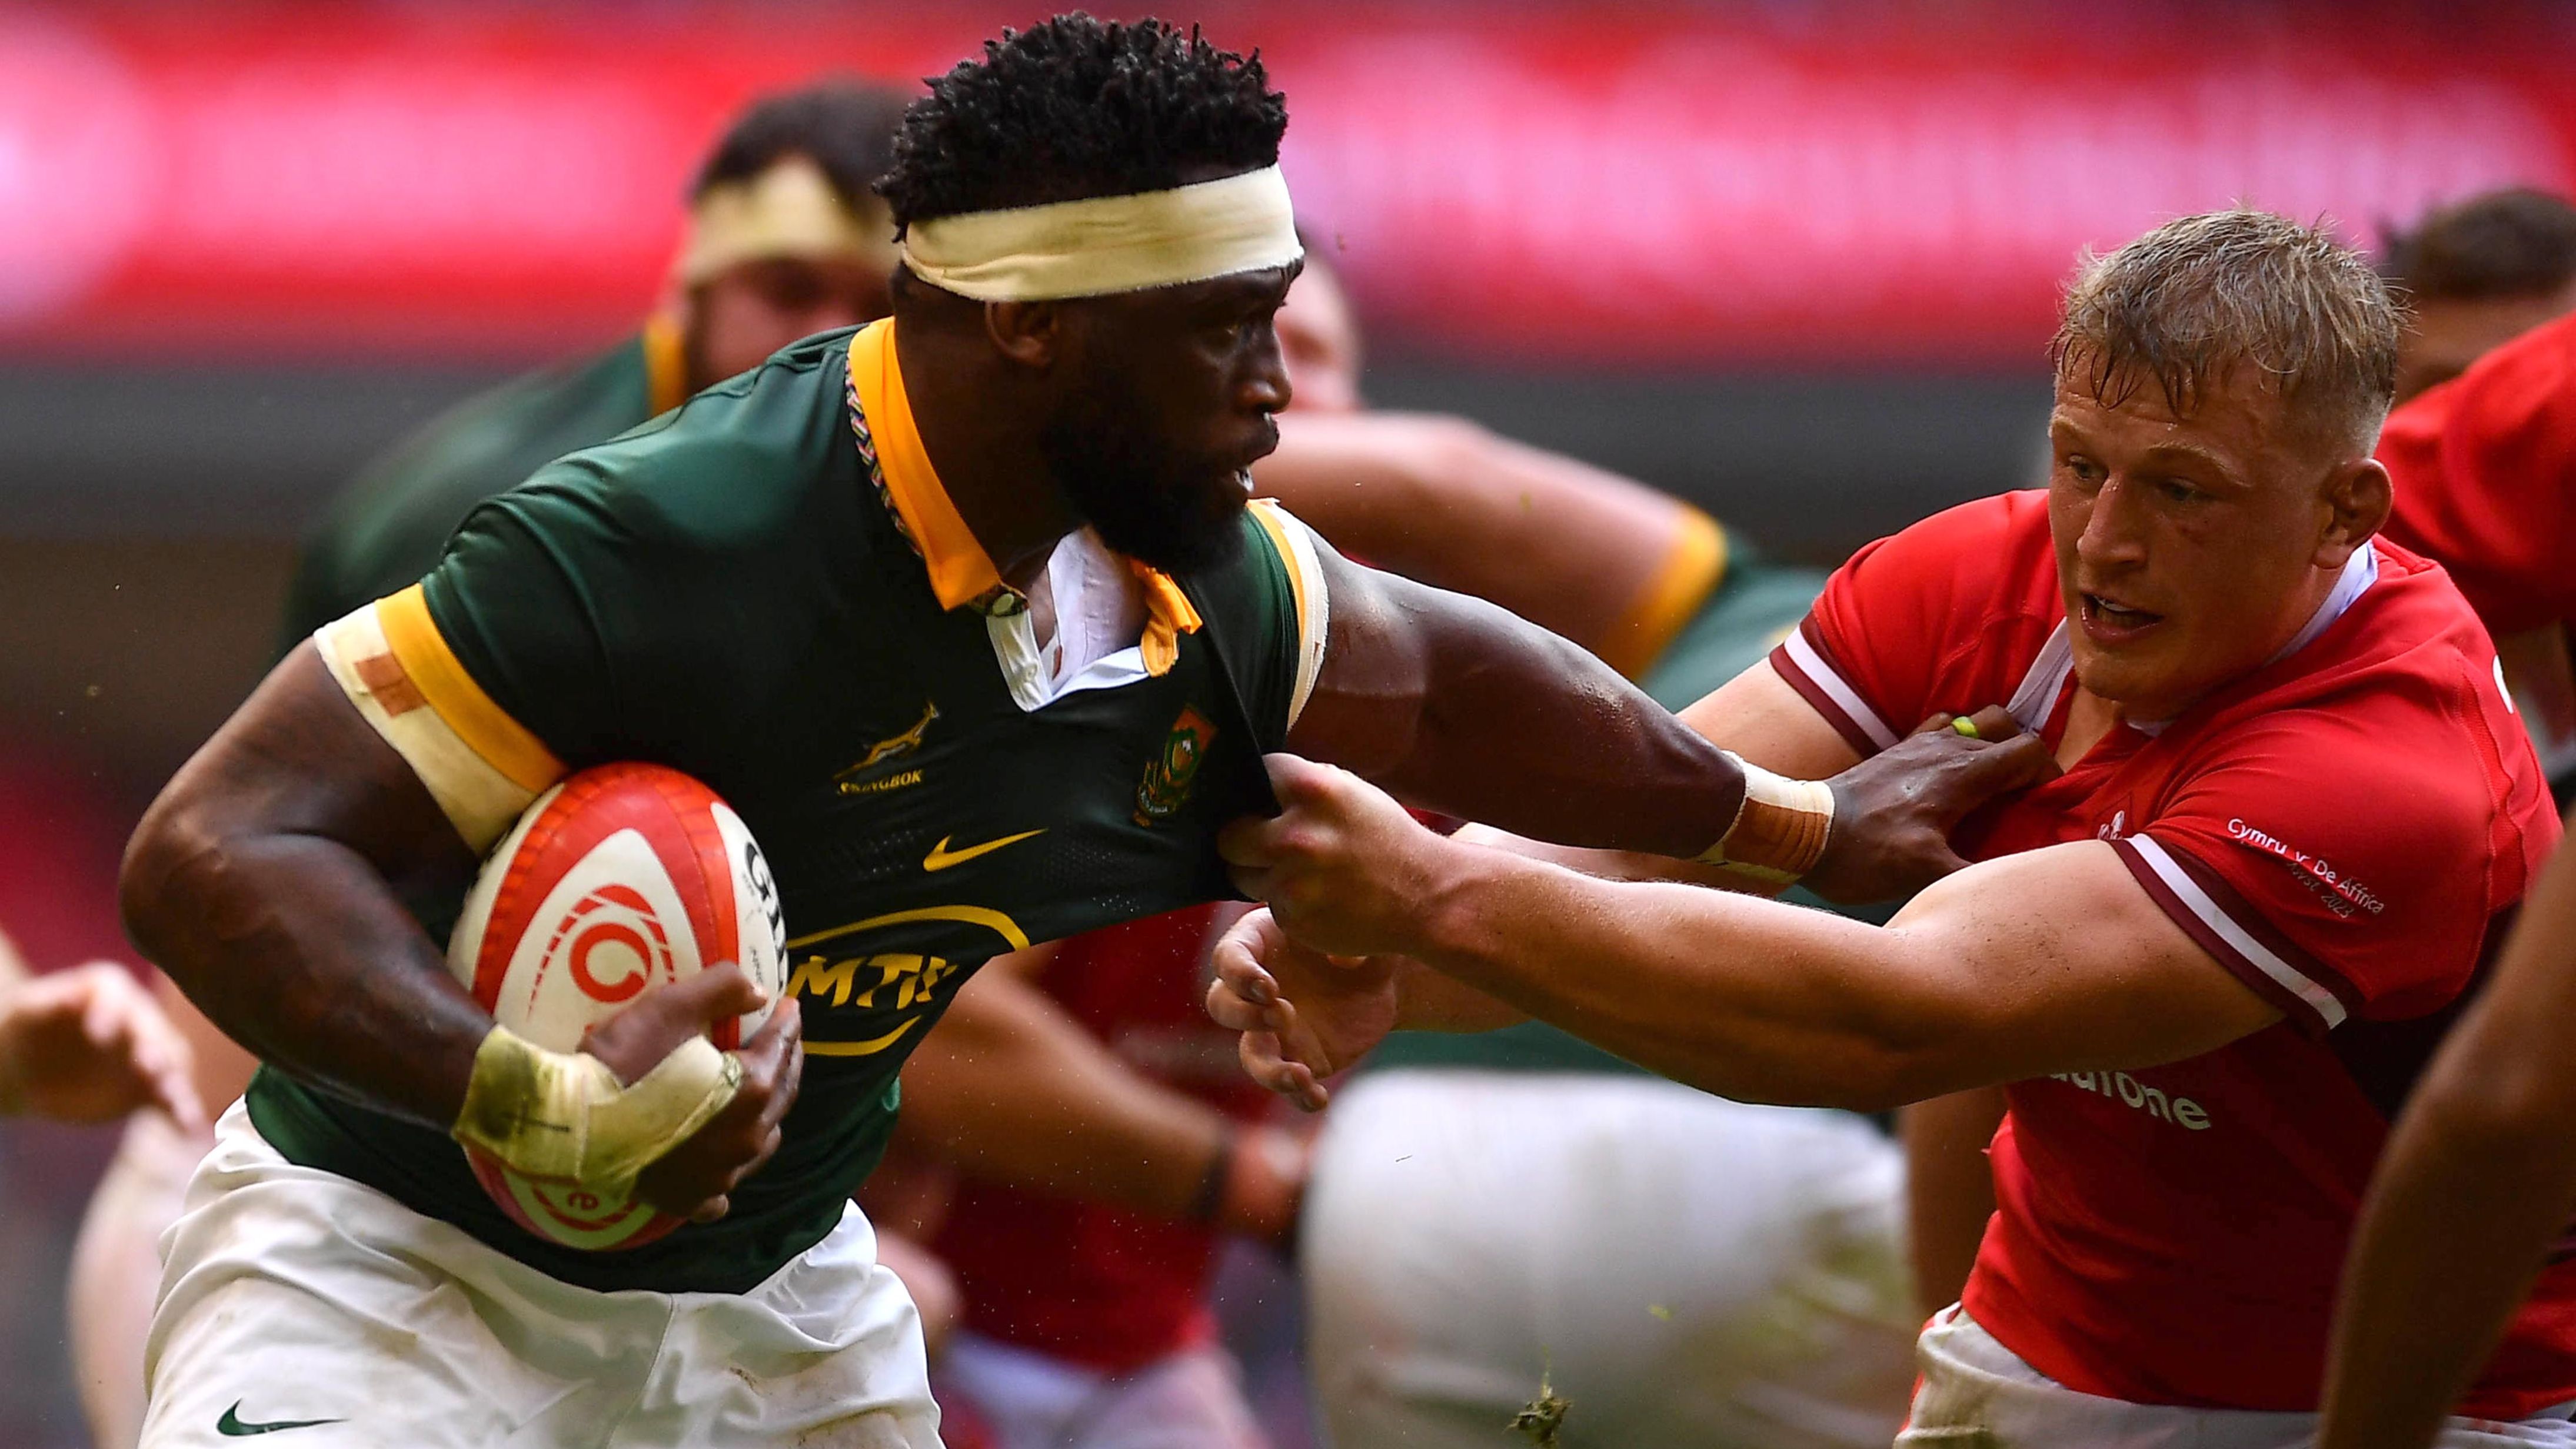 Rugby World Cup warm-up Wales 16-52 South Africa - reaction to heavy Wales defeat - Live